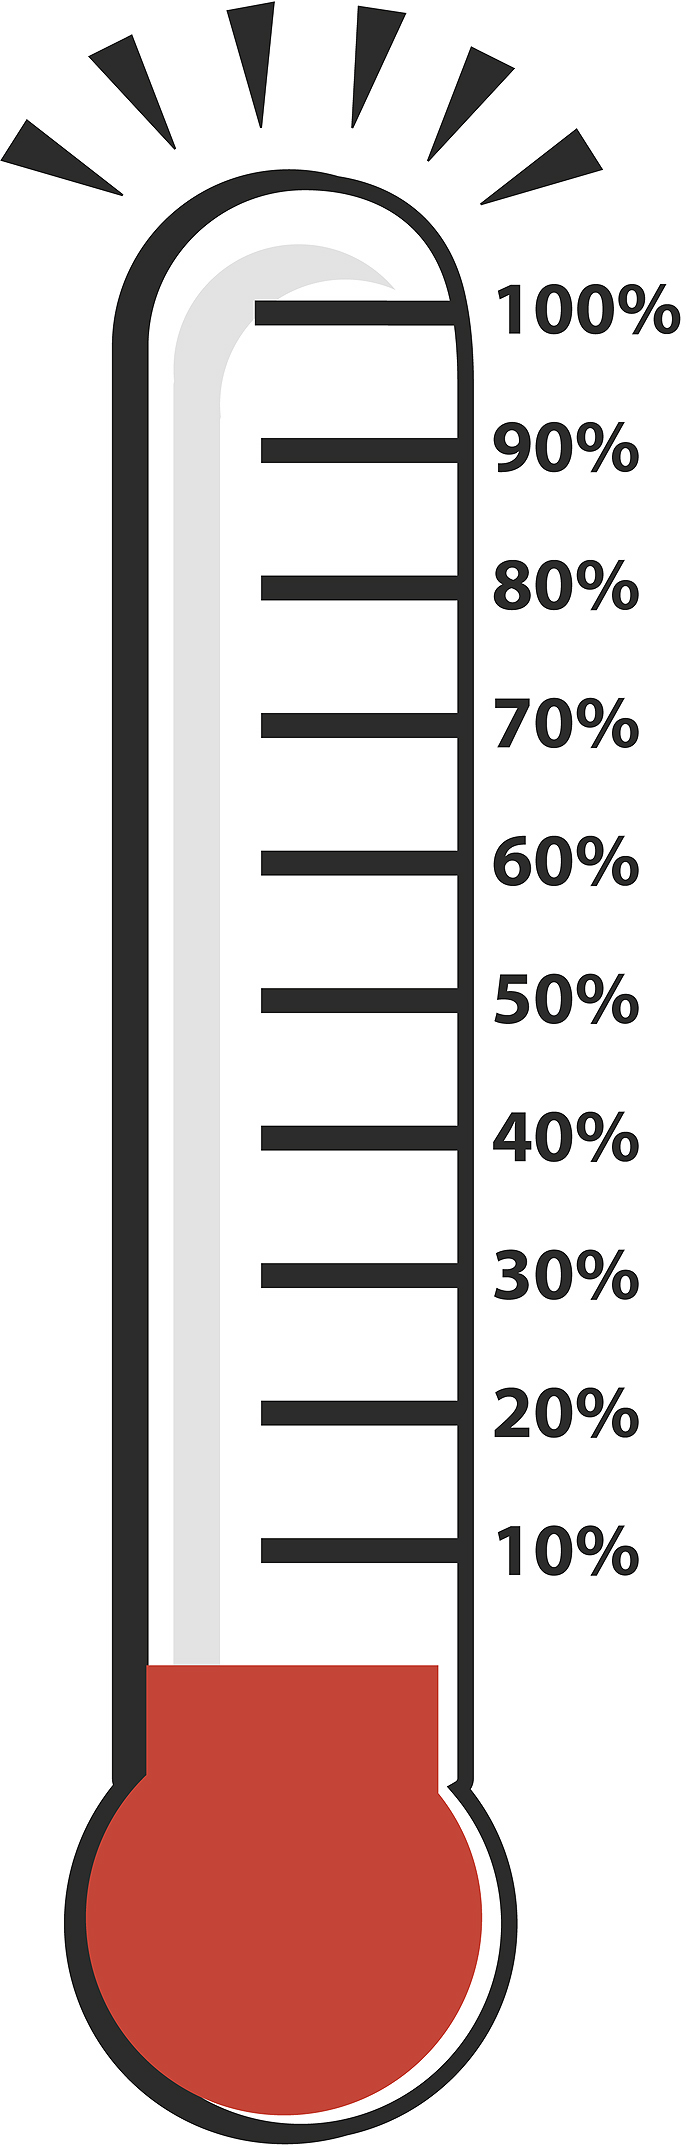 Fundraising Goal Thermometer  - Fundraising Thermometer Clip Art